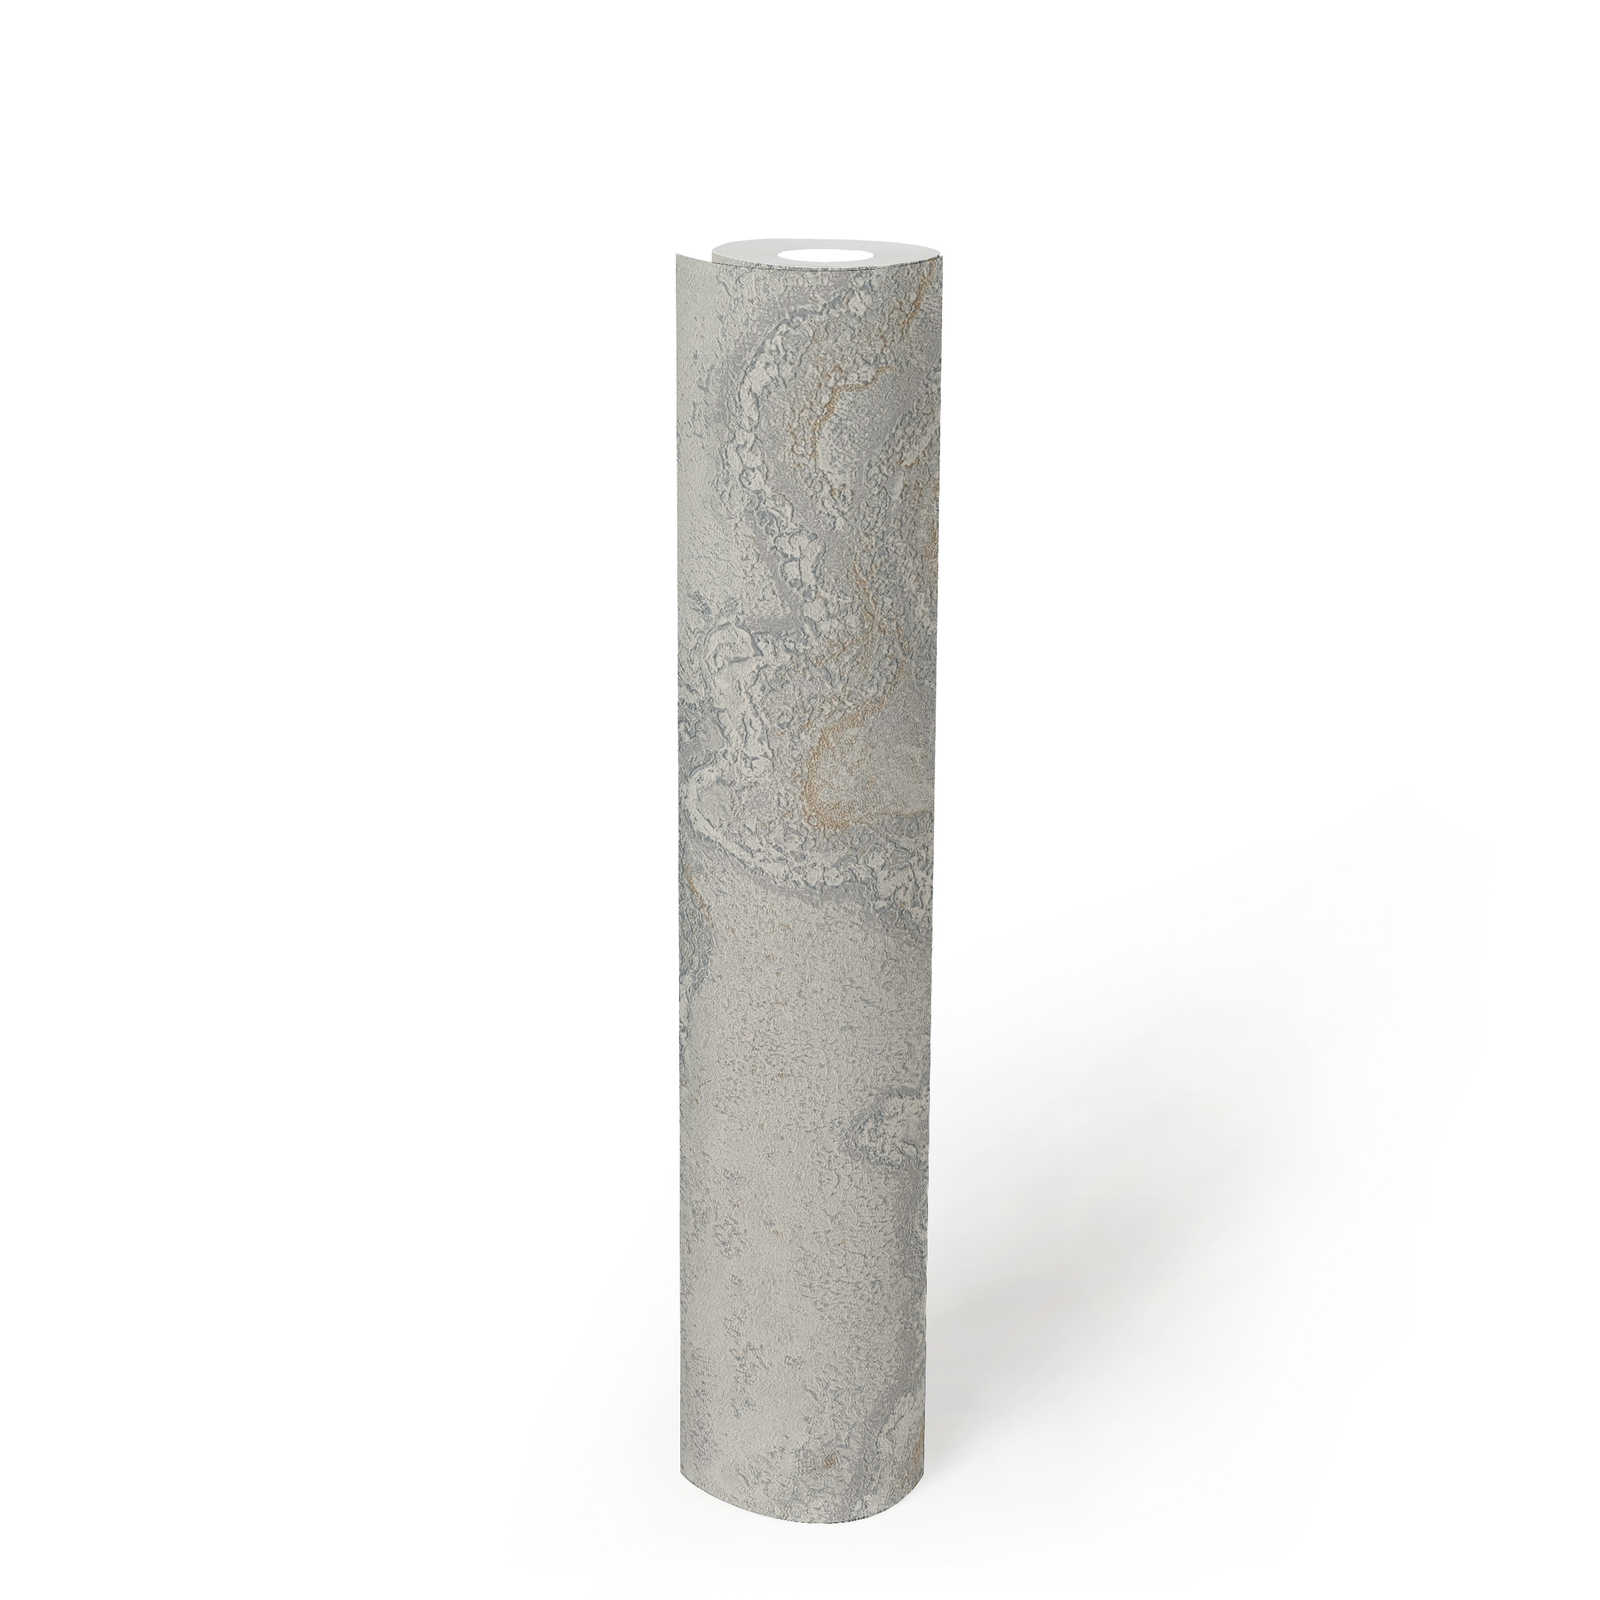             Non-woven wallpaper with marble pattern - grey, silver, gold
        